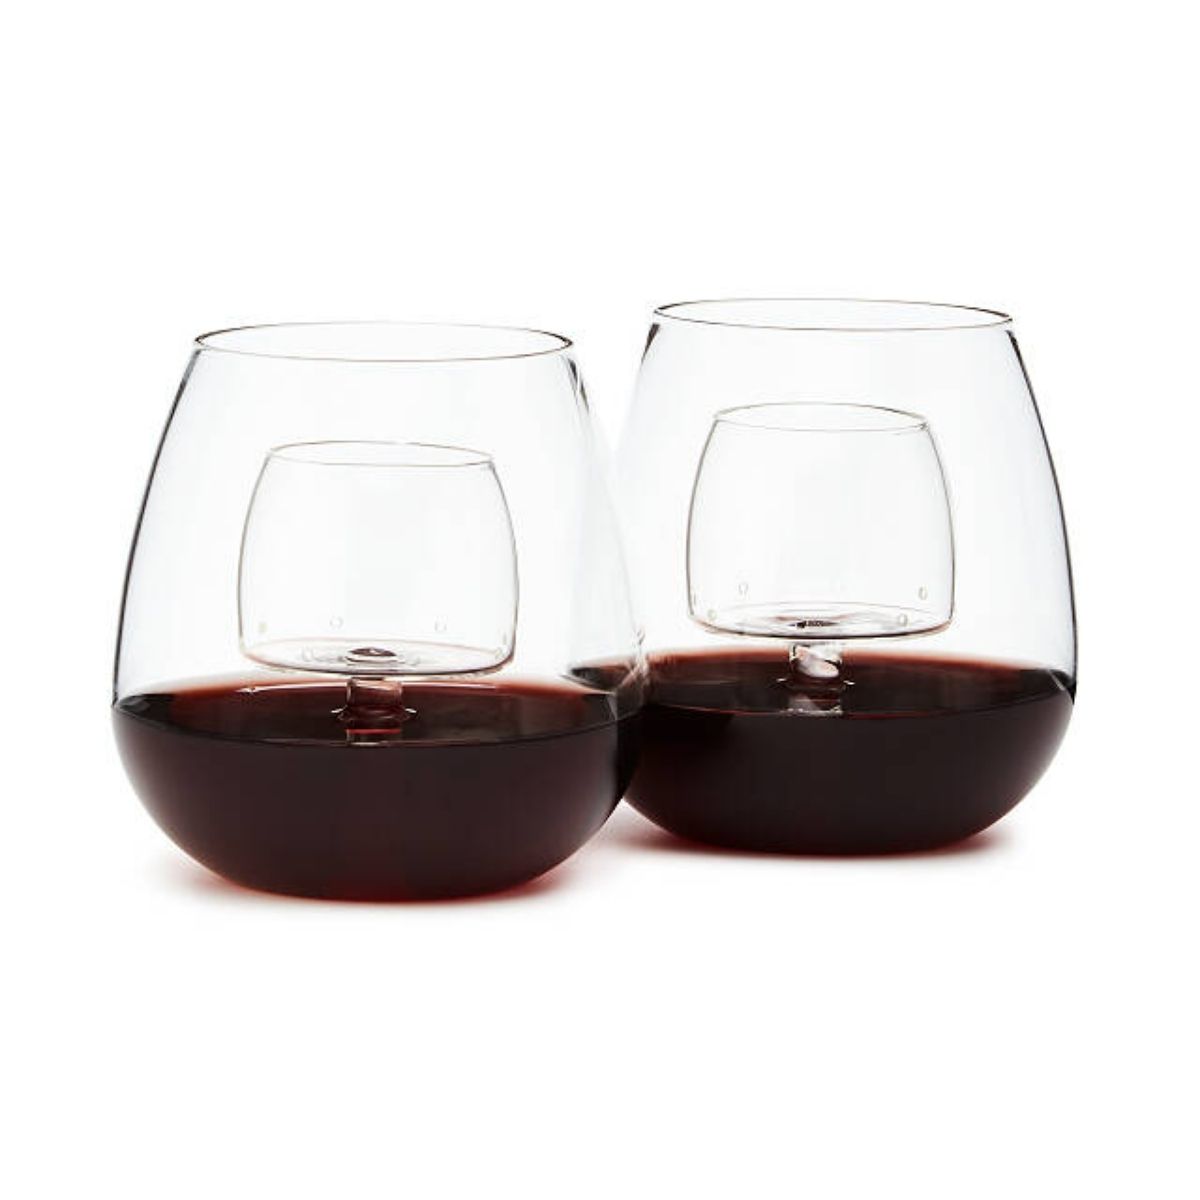 The Best Gifts for Wine Lovers Option: Stemless Aerating Wine Glasses